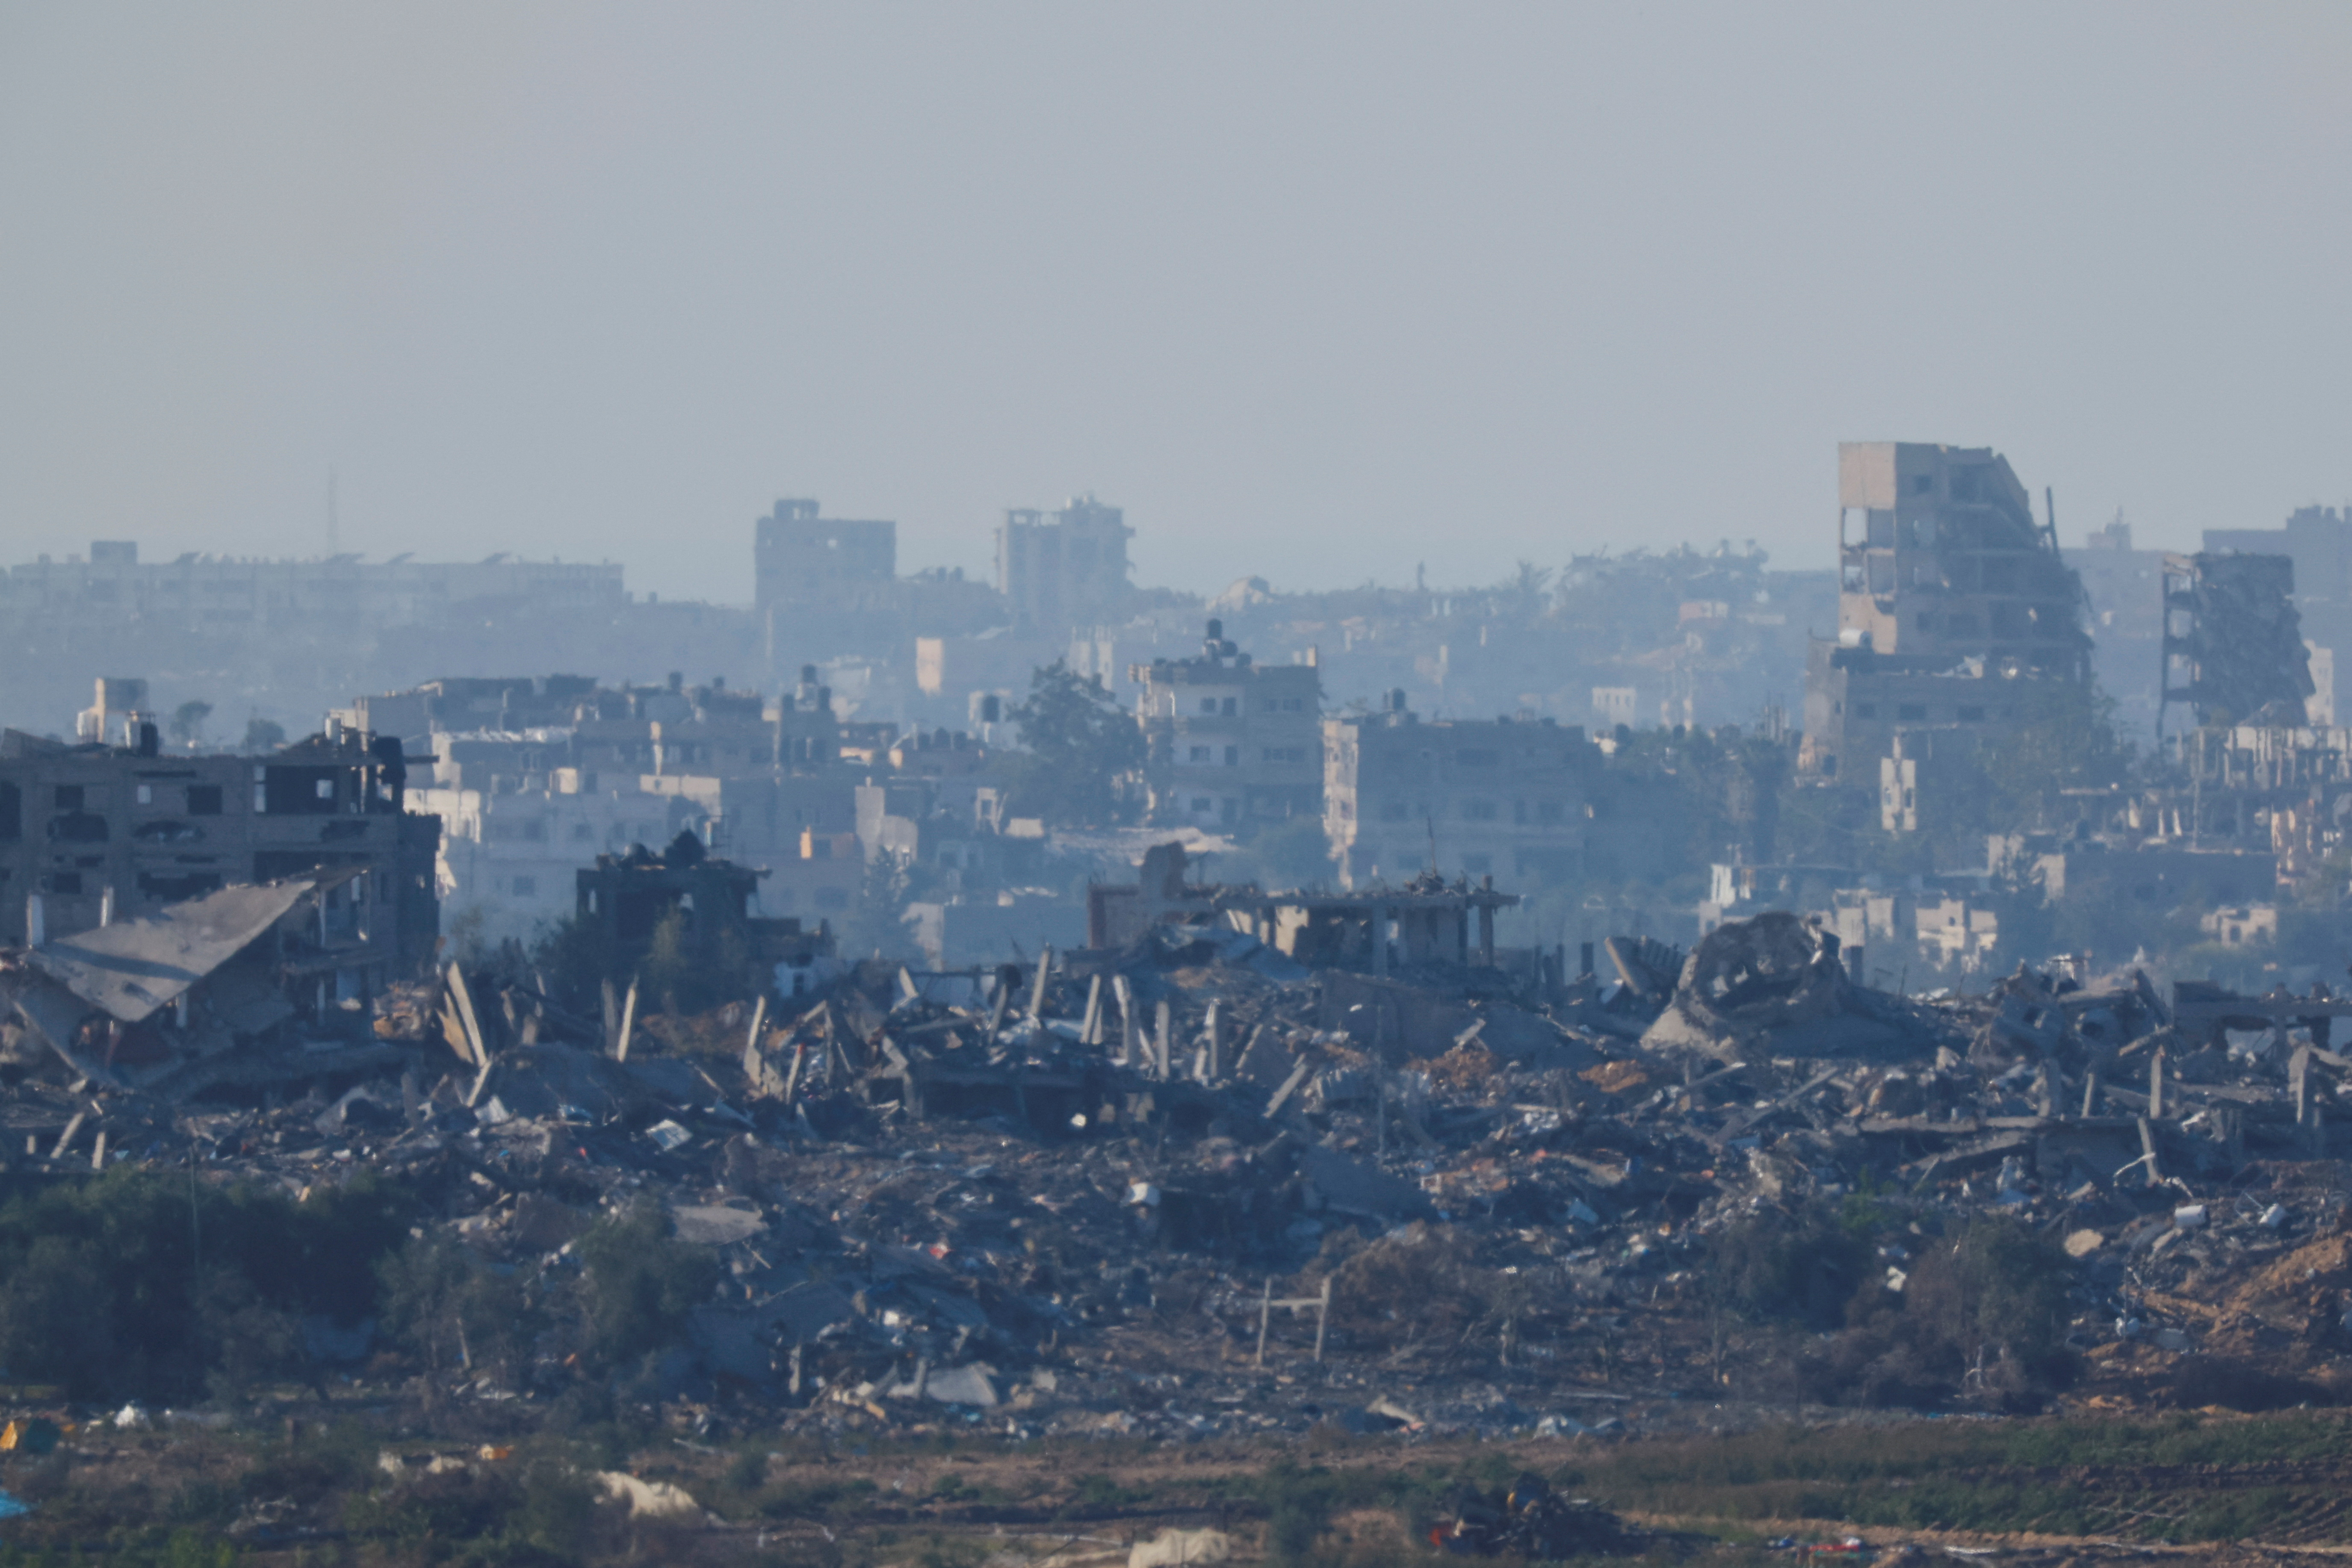 A view shows the damaged buildings of Northern Gaza strip, as seen from the viewpoint in Sderot